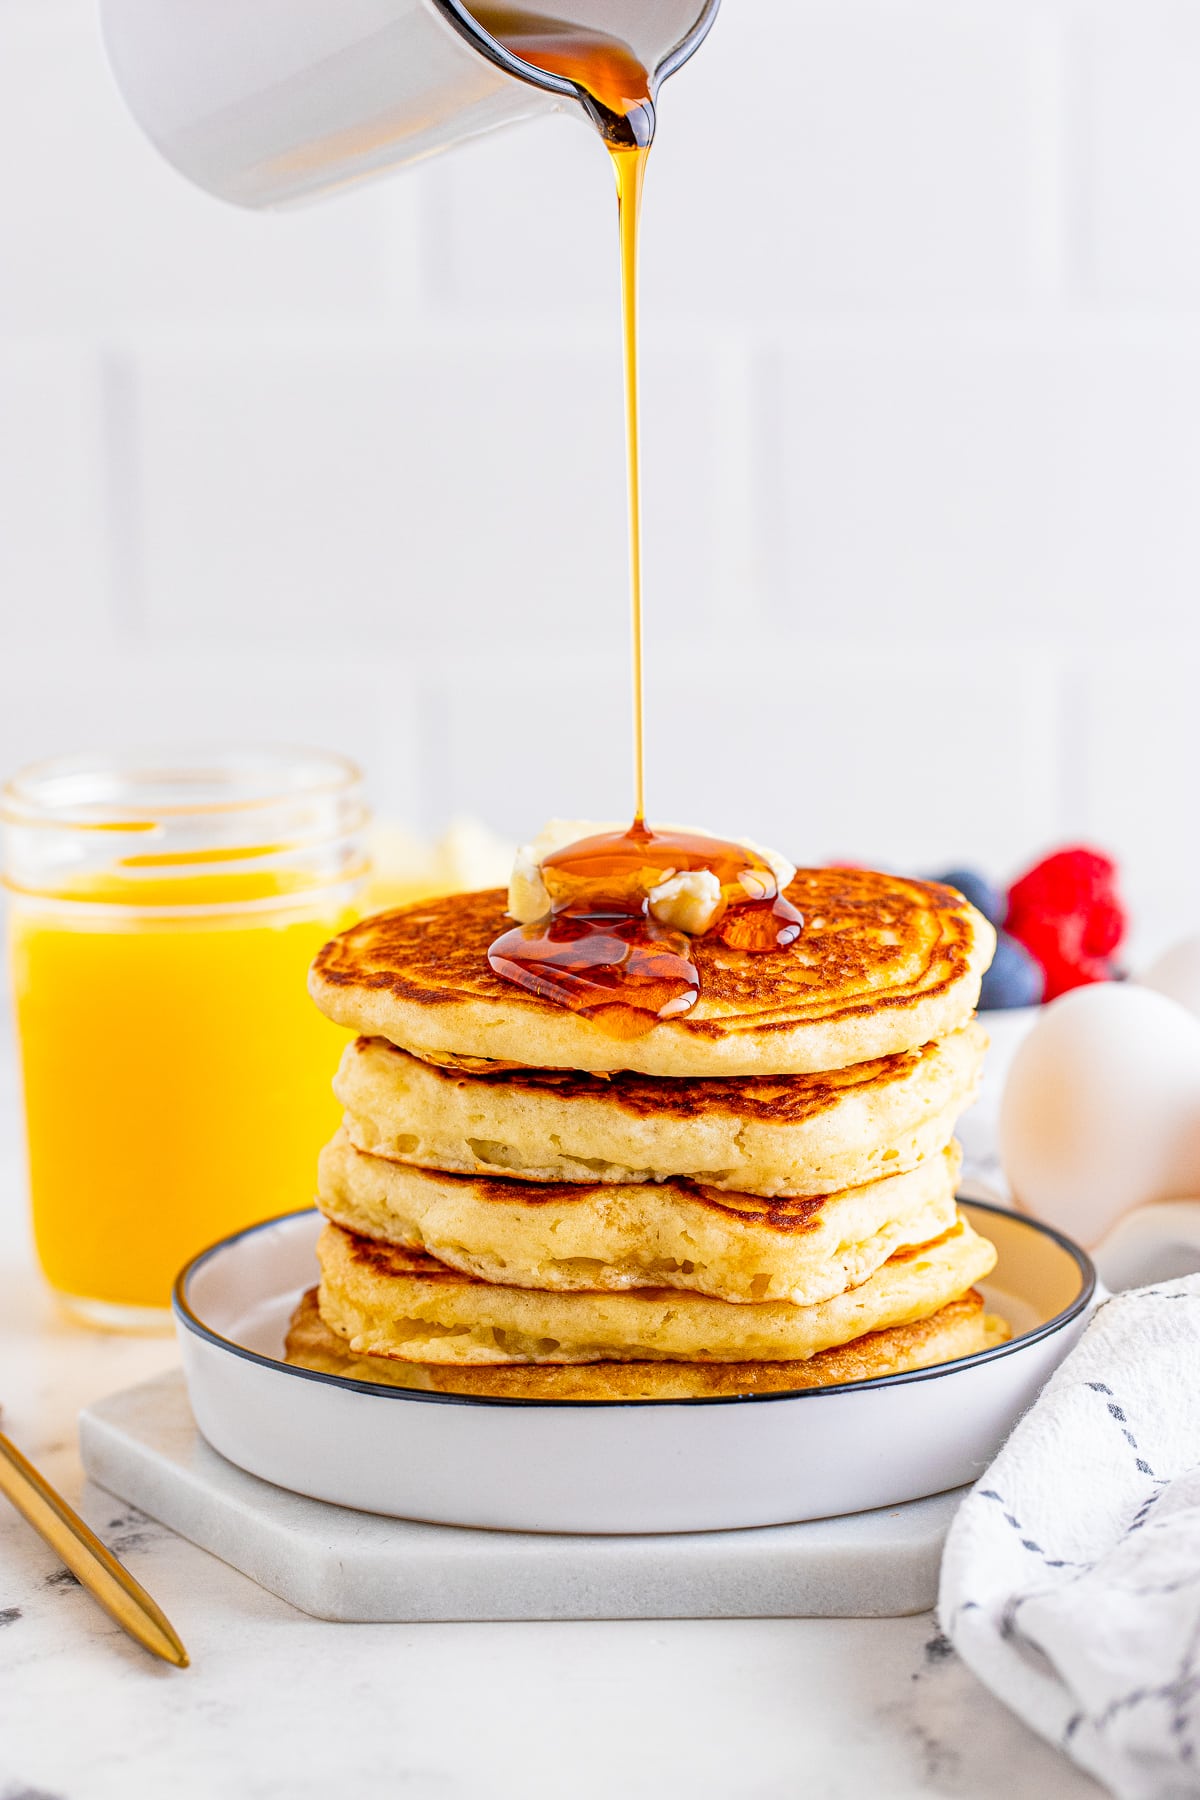 Syrup being poured over the stack of pancakes on white plate.